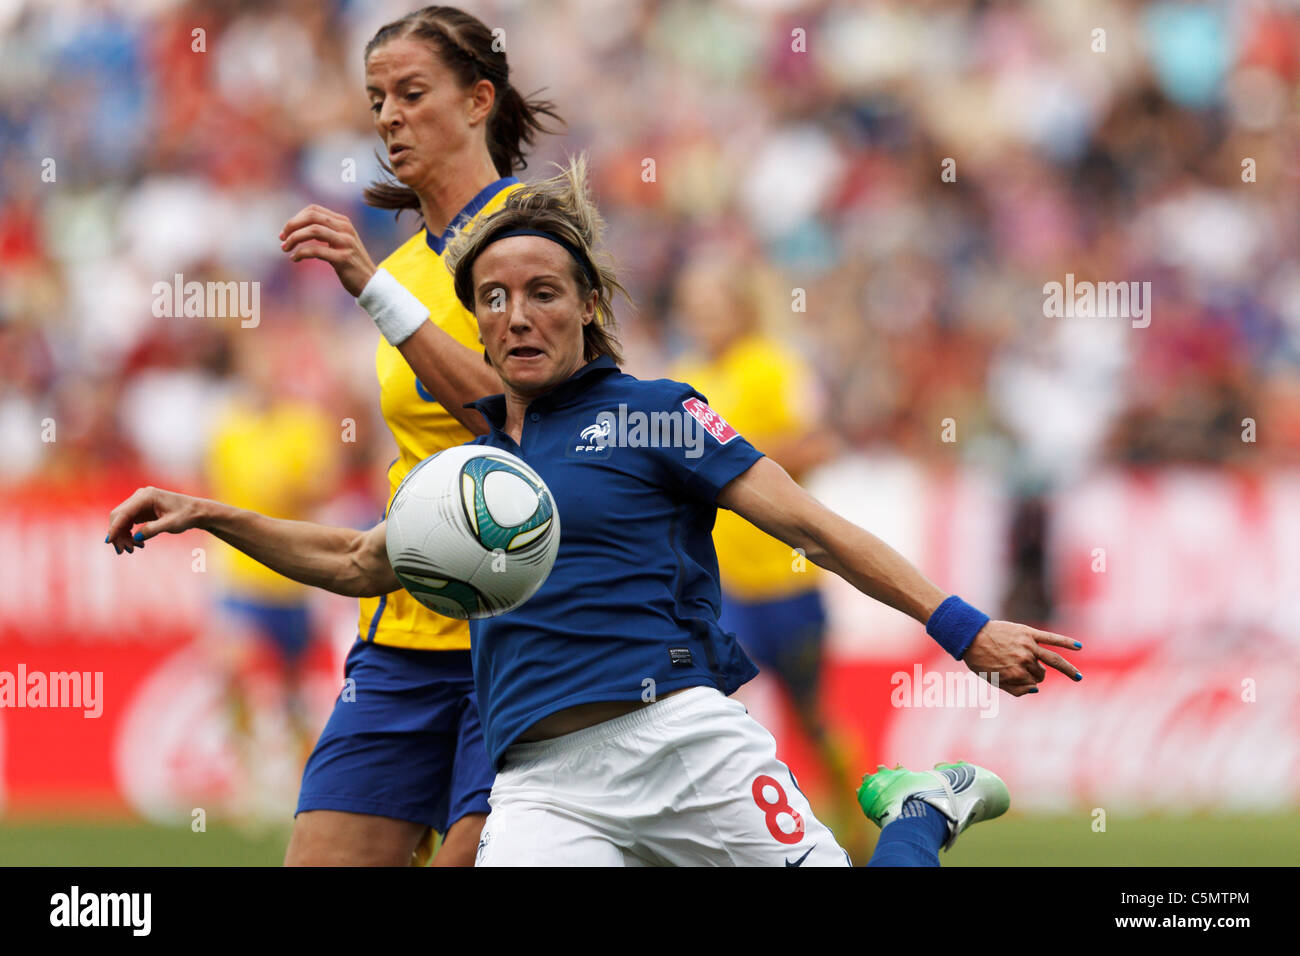 Sonia Bompastor of France (8) sets to clear the ball ahead of Lotta Schelin of Sweden during 2011 Women's World Cup 3rd place Stock Photo